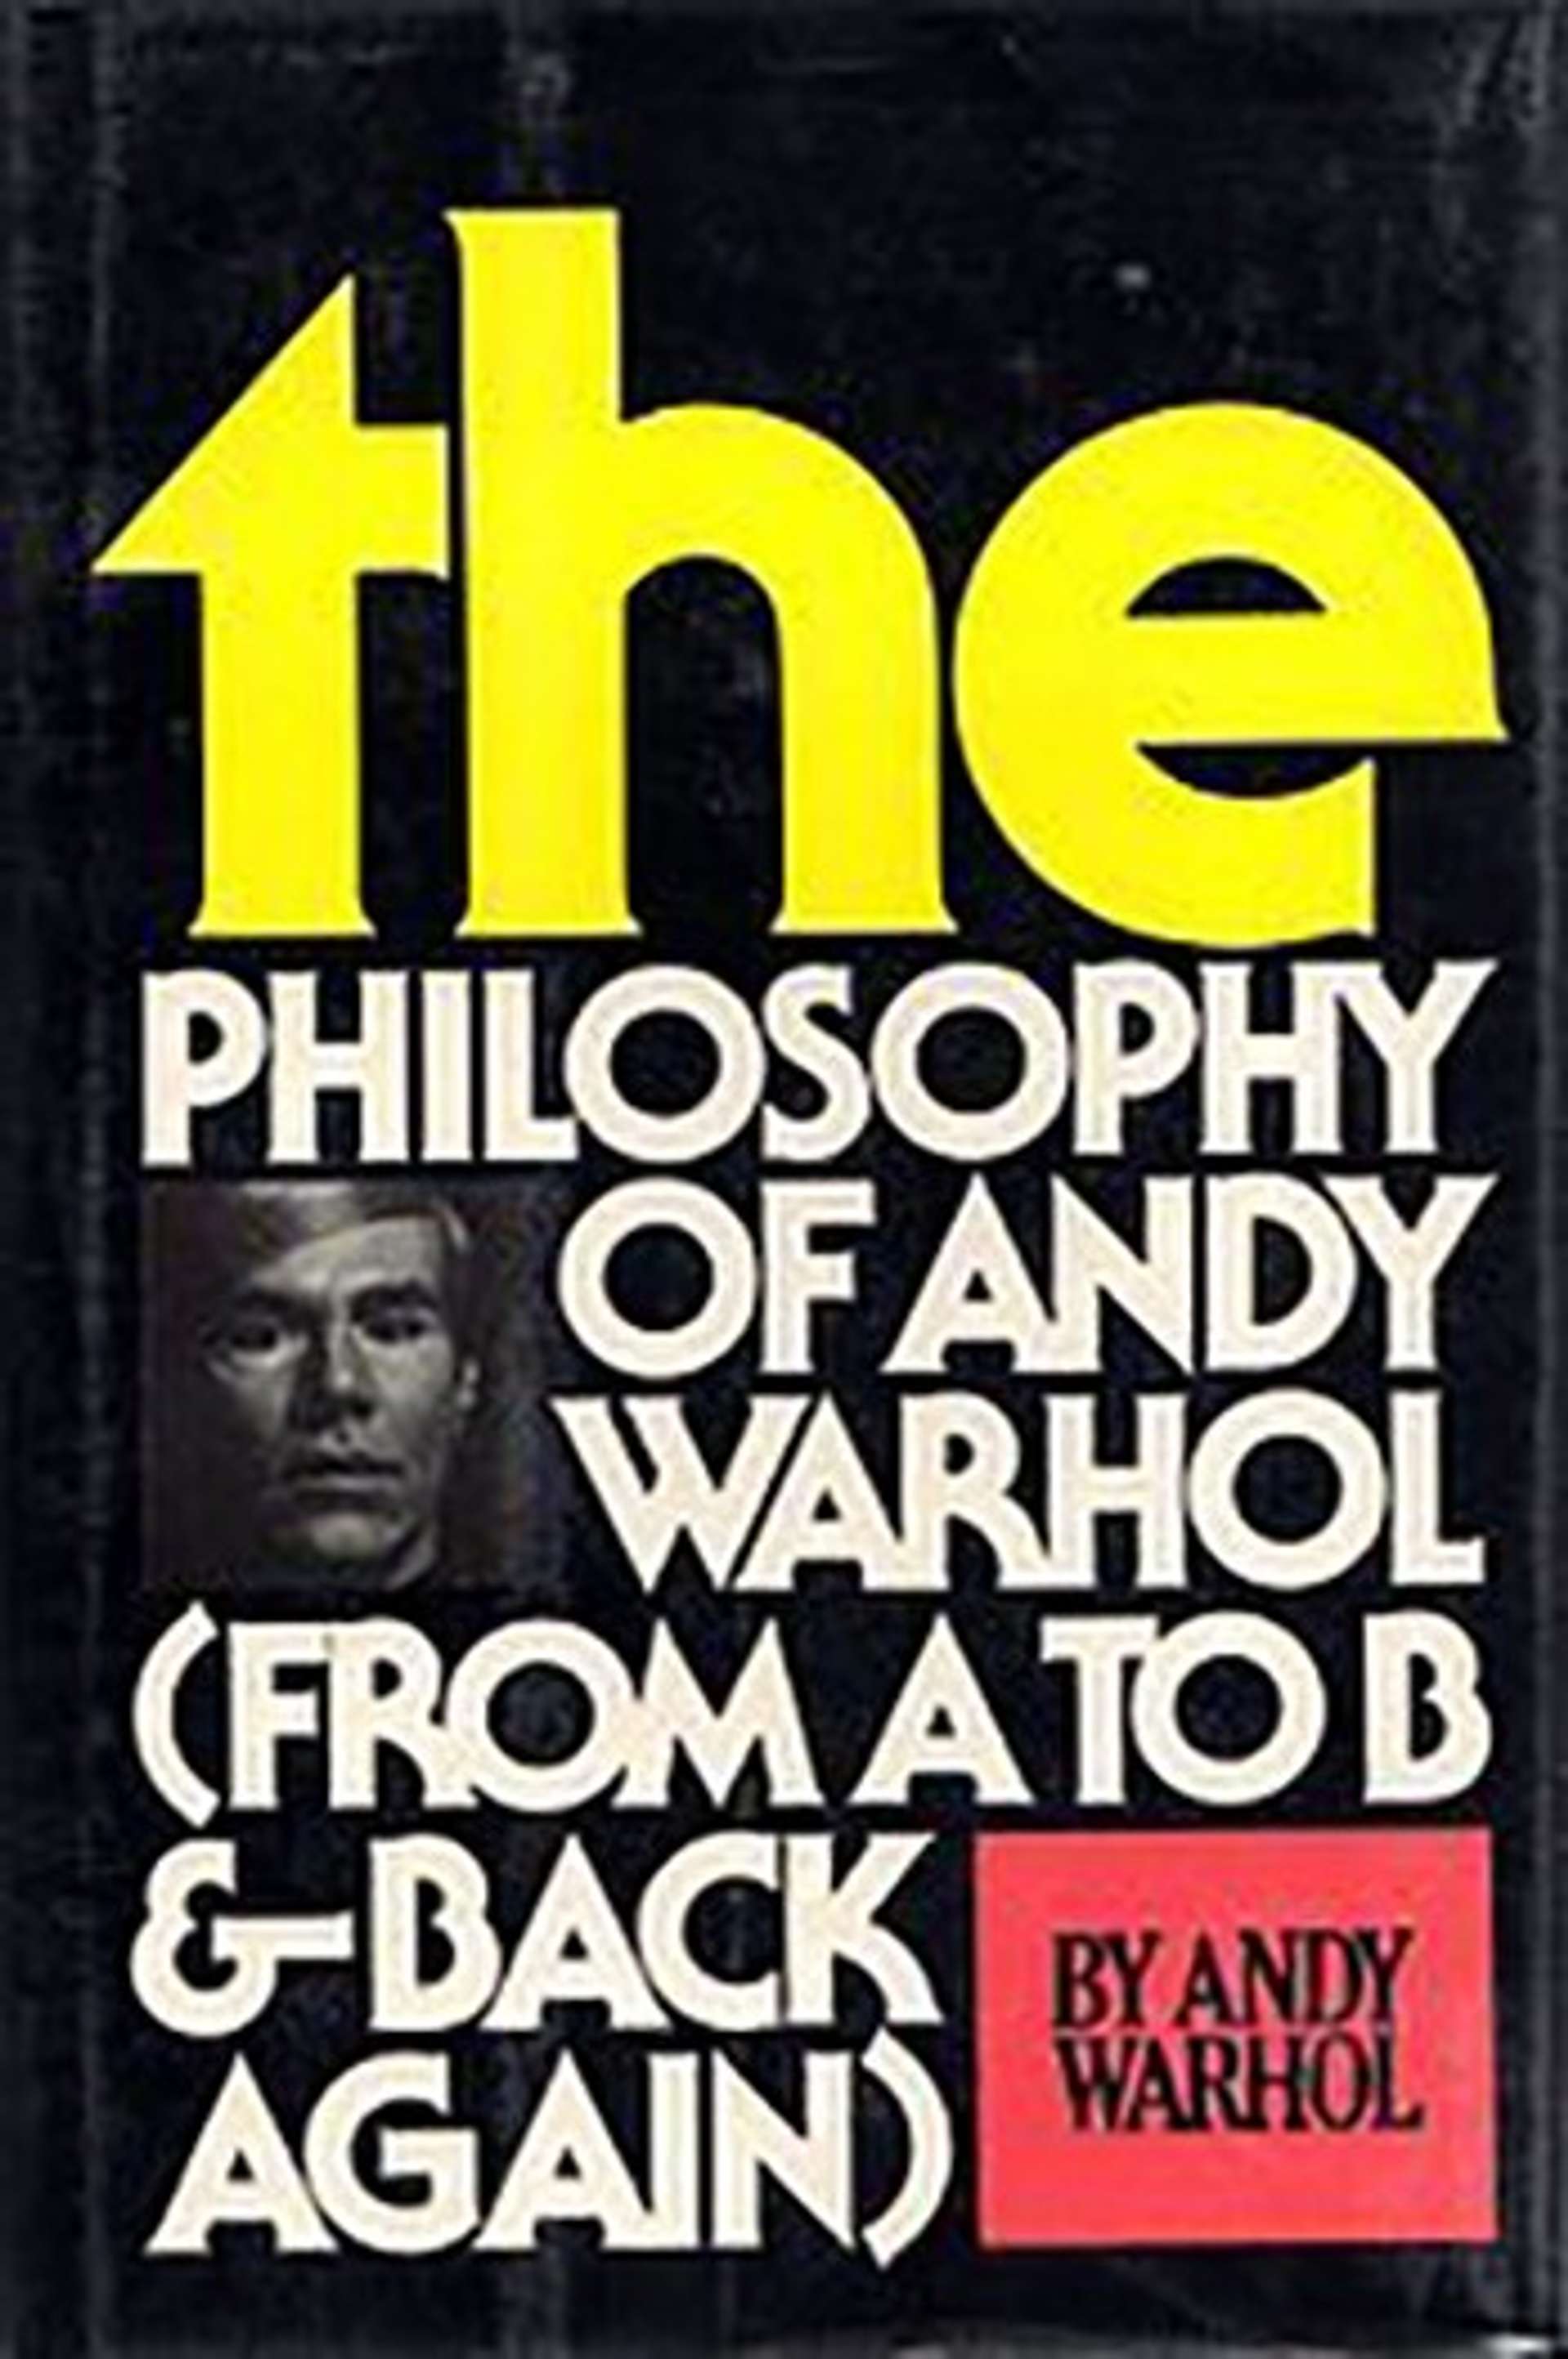 The Philosophy Of Andy Warhol (From A to B & Back Again) by Andy Warhol - MyArtBroker